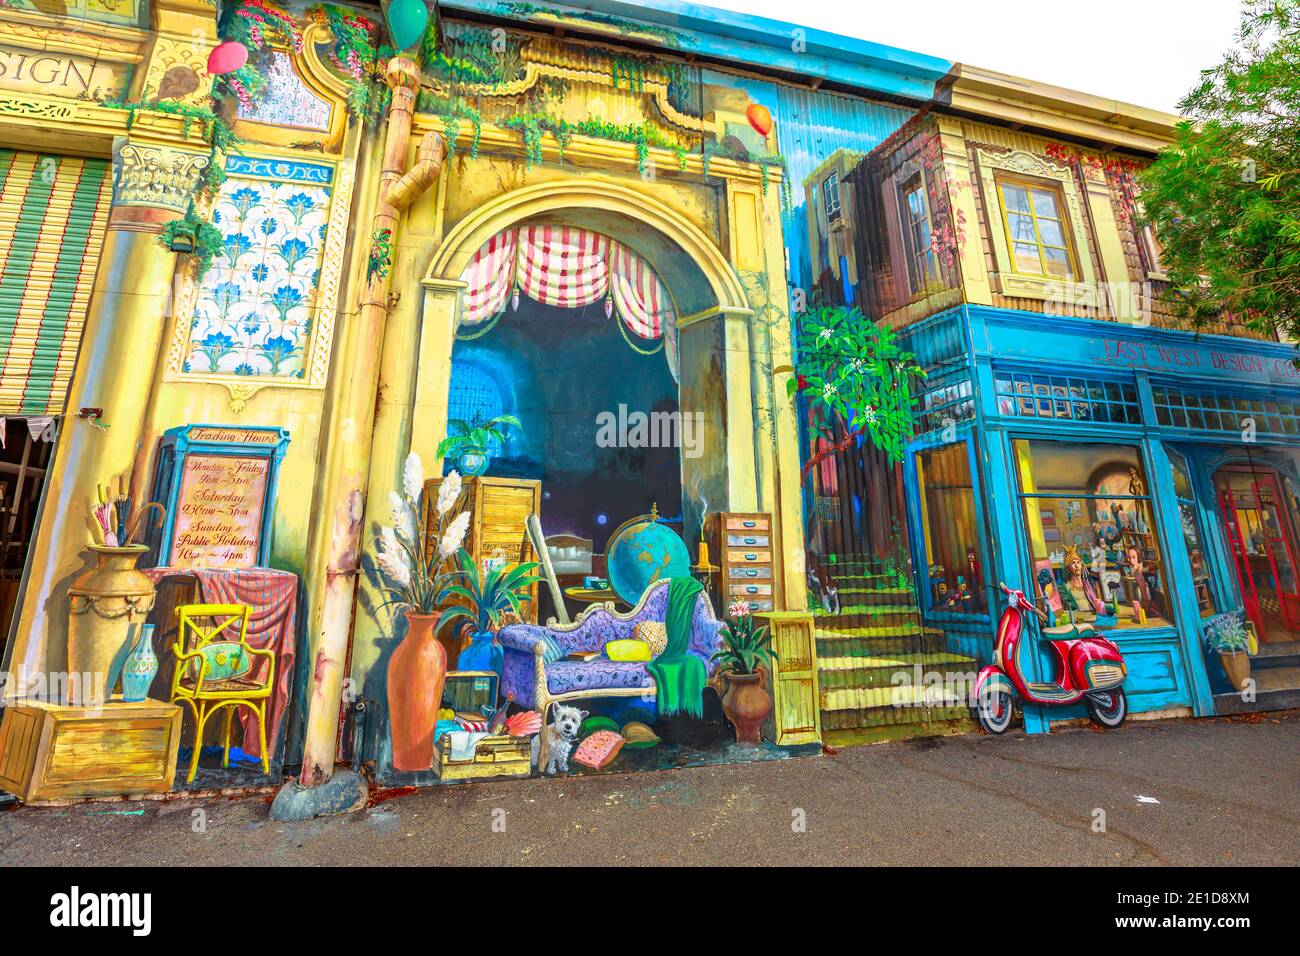 Fremantle, Western Australia - Jan 5, 2018: oil painting mural on building on South Terrace, now a popular tourist attraction, a road known as the Stock Photo